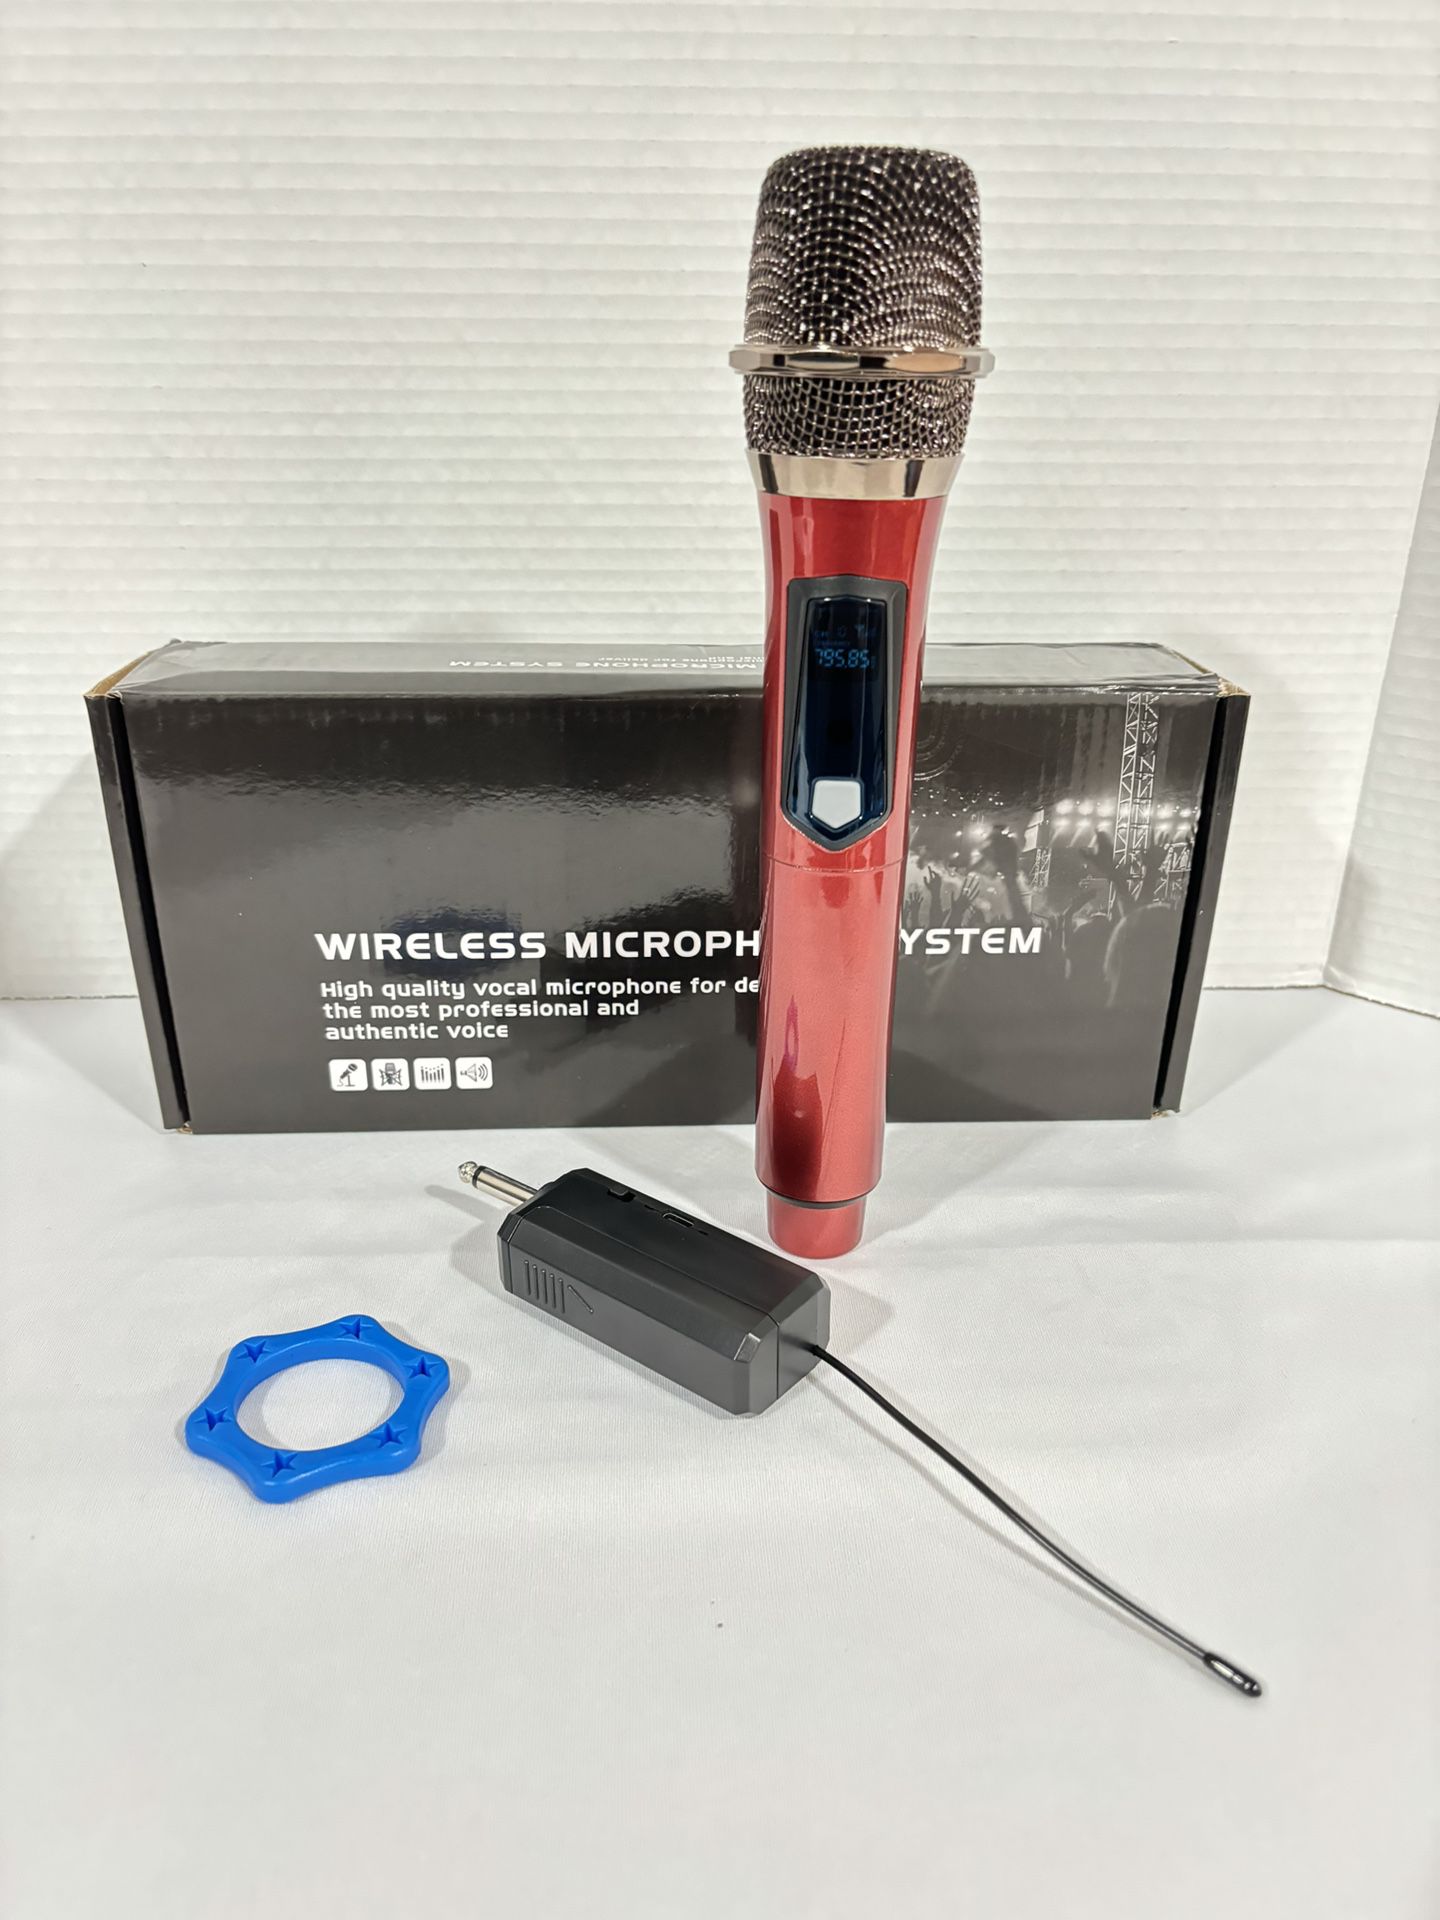 Microphone 🎤 Wireless 🛜 Battery 🔋 Charger 🔌 $25.NEW